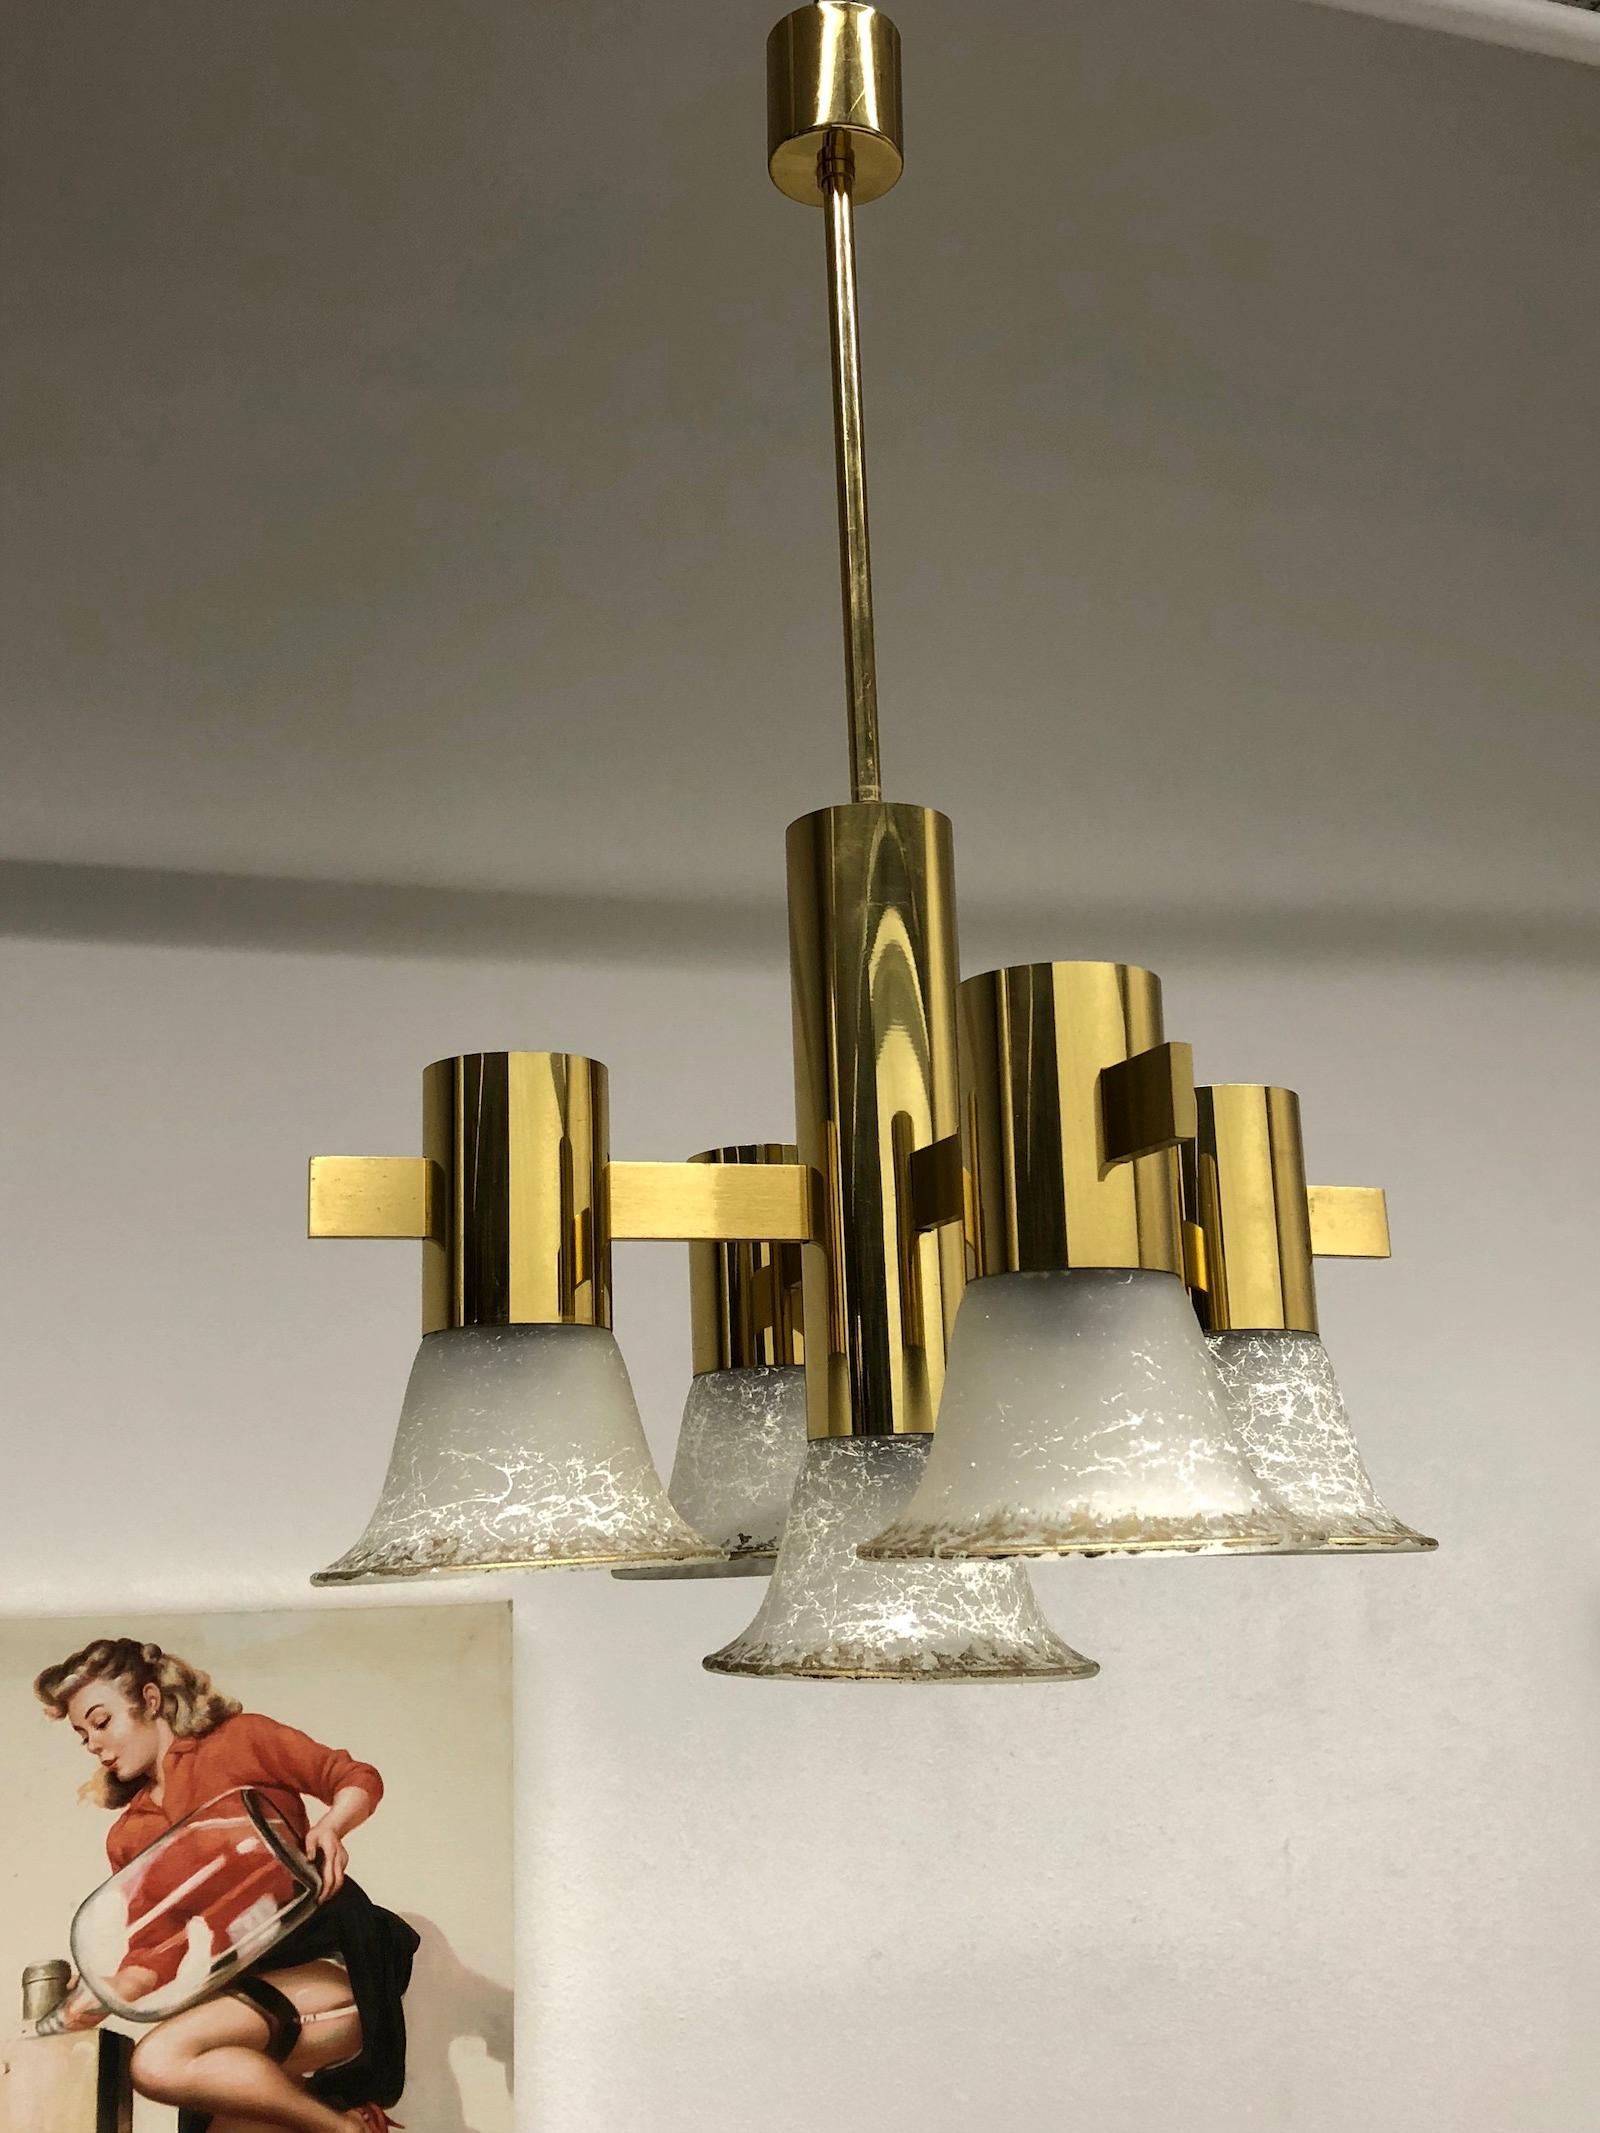 Very rare and beautiful gold-plated chandelier. Italy, 1970s. The Chandelier requires five European E14 candelabra bulbs, each up to 40 watts.